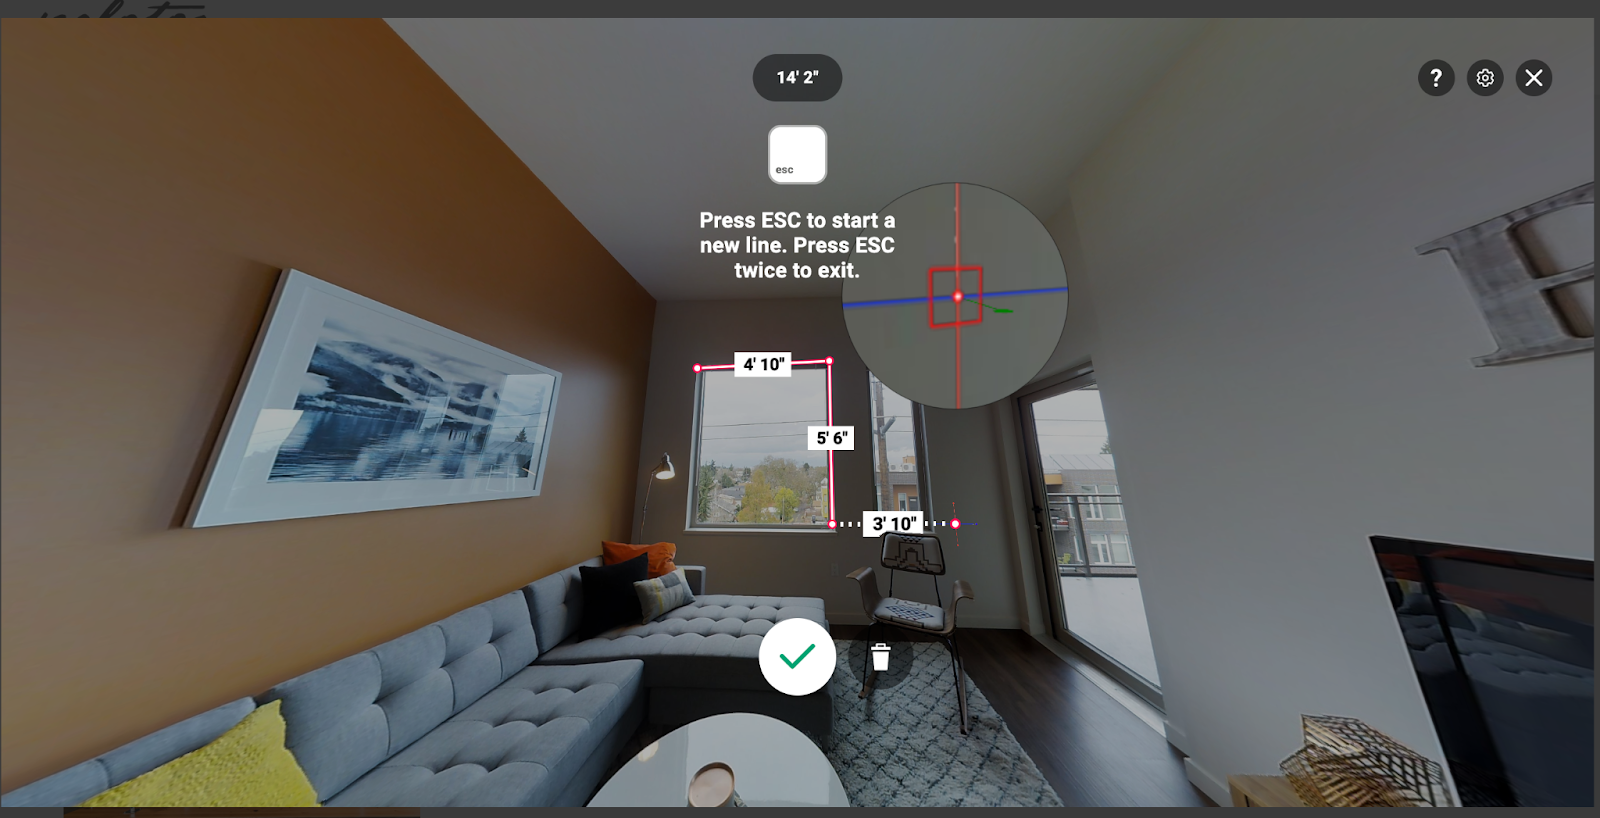 a screenshot of a #D virtual tour in which the viewer can measure aspects of the apartment unit from video renderings